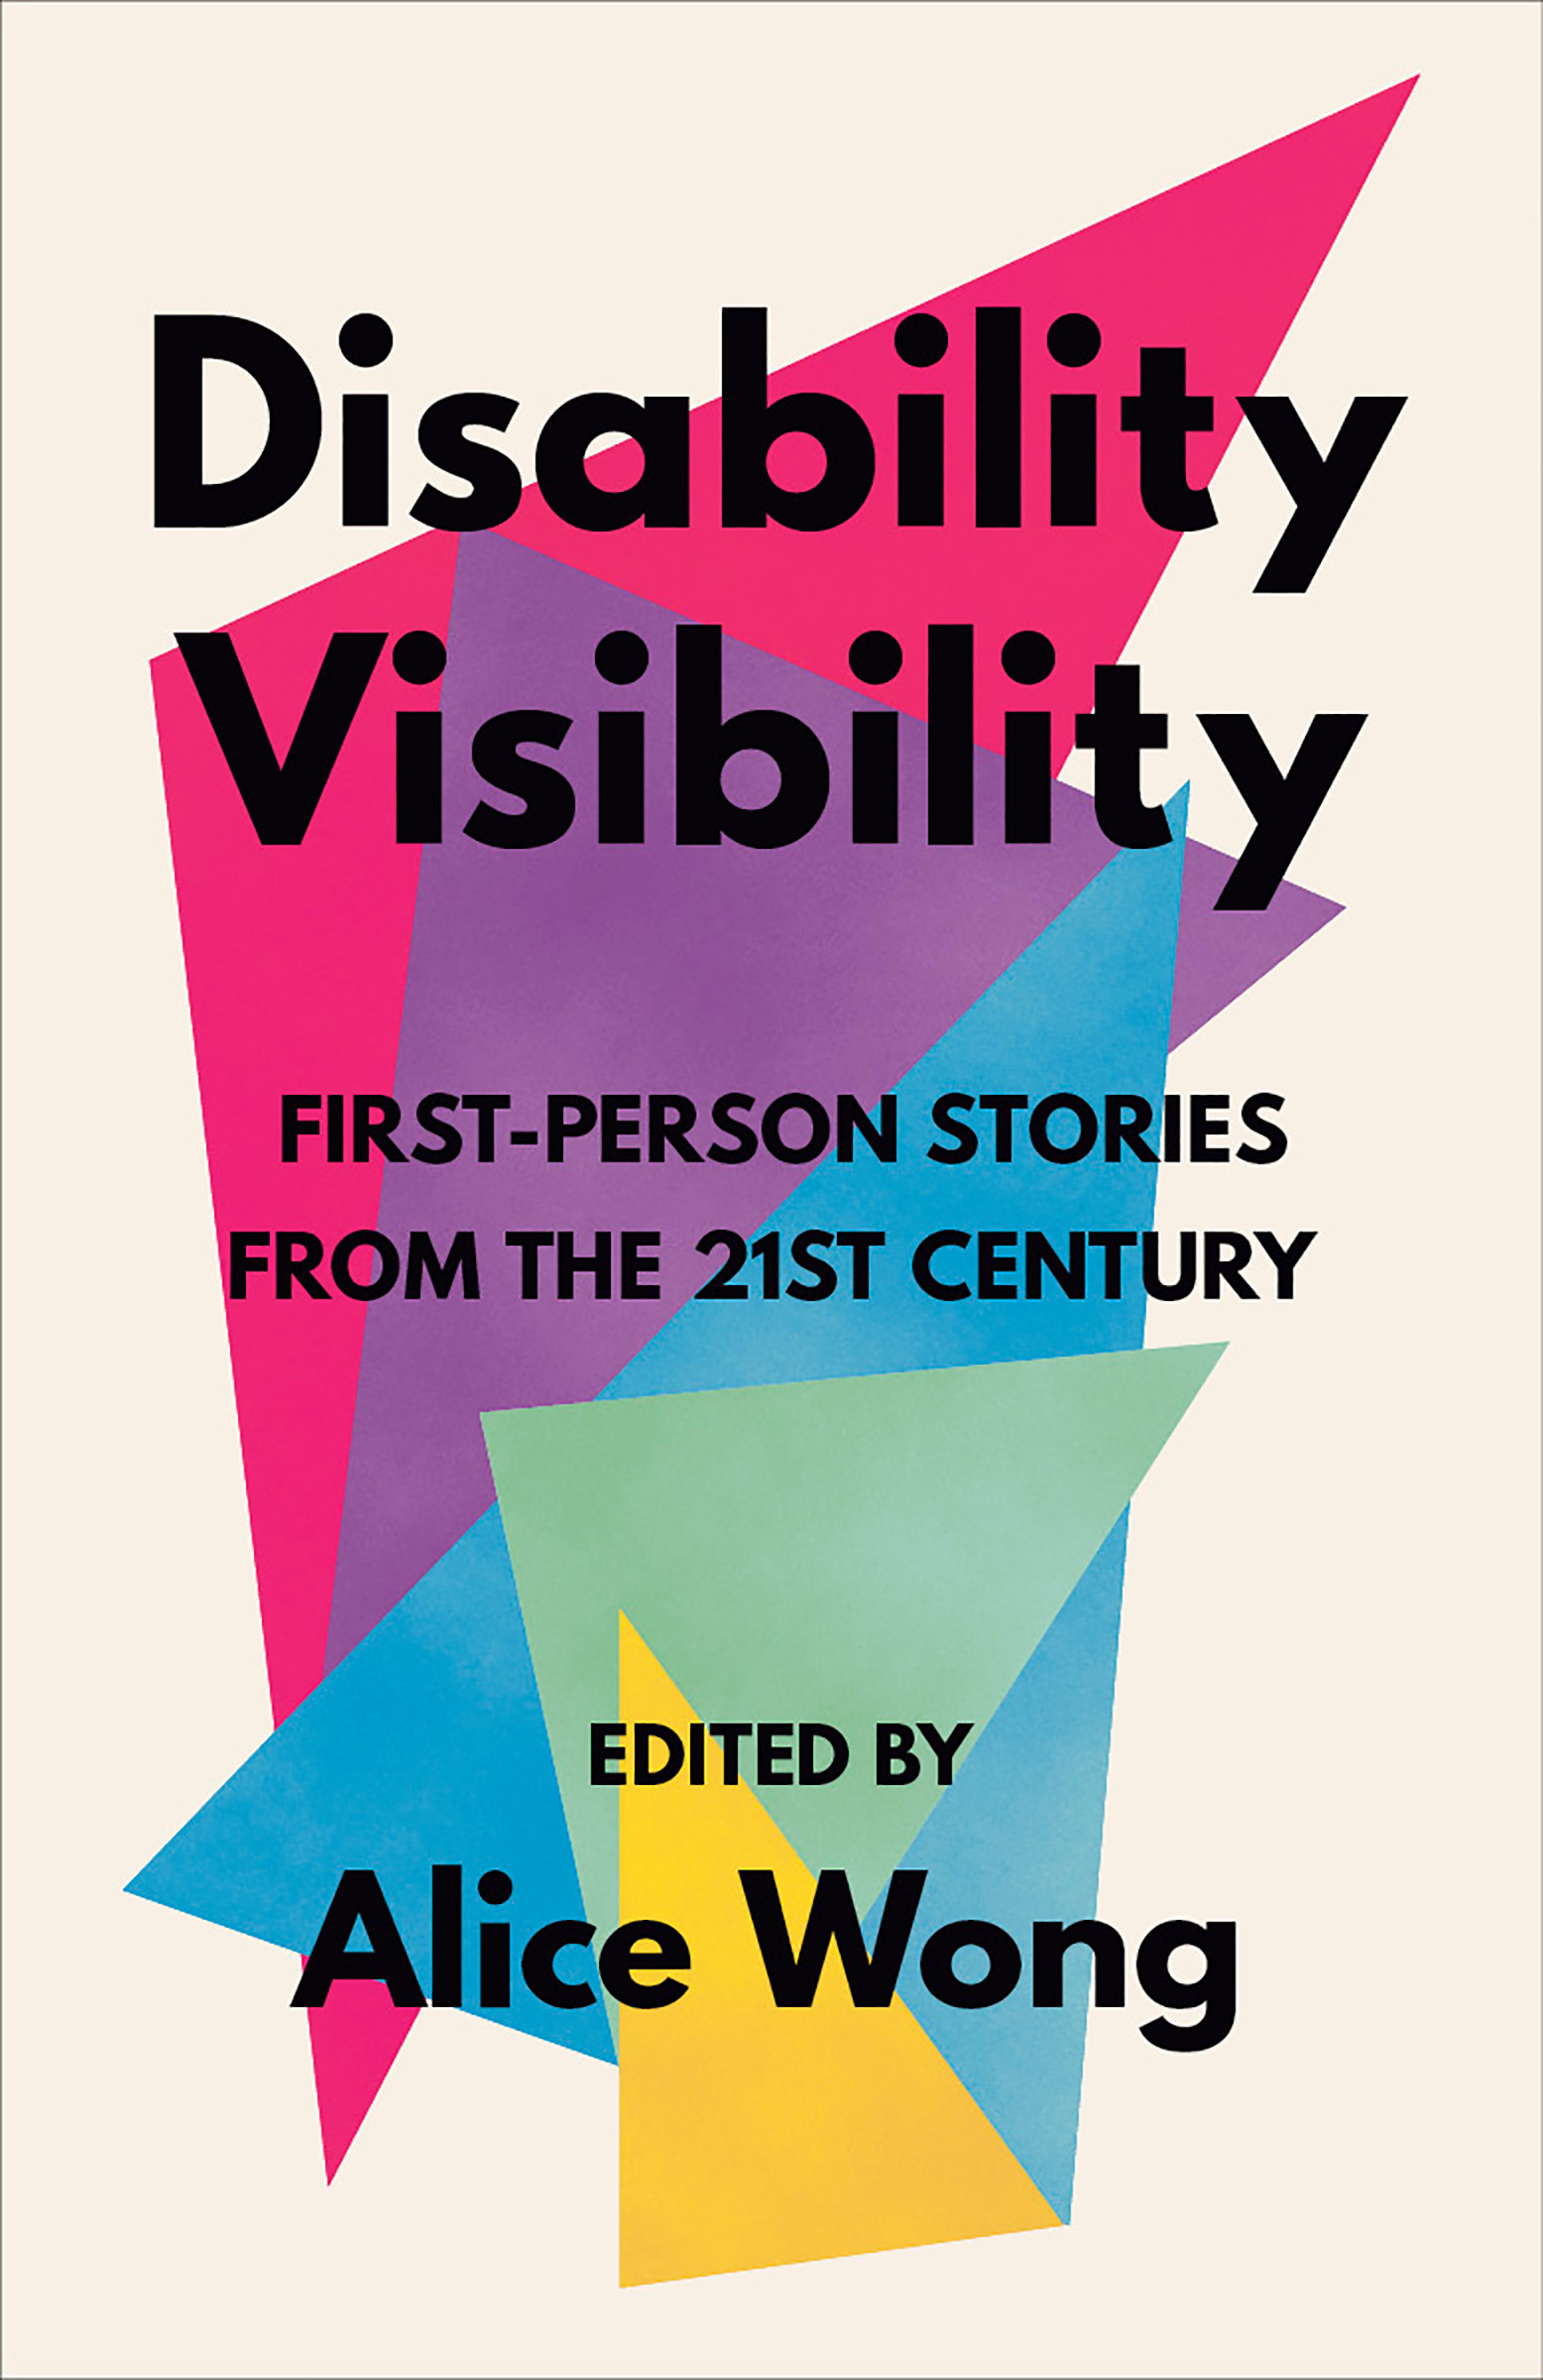 Disability Visibility (2020, Vintage)